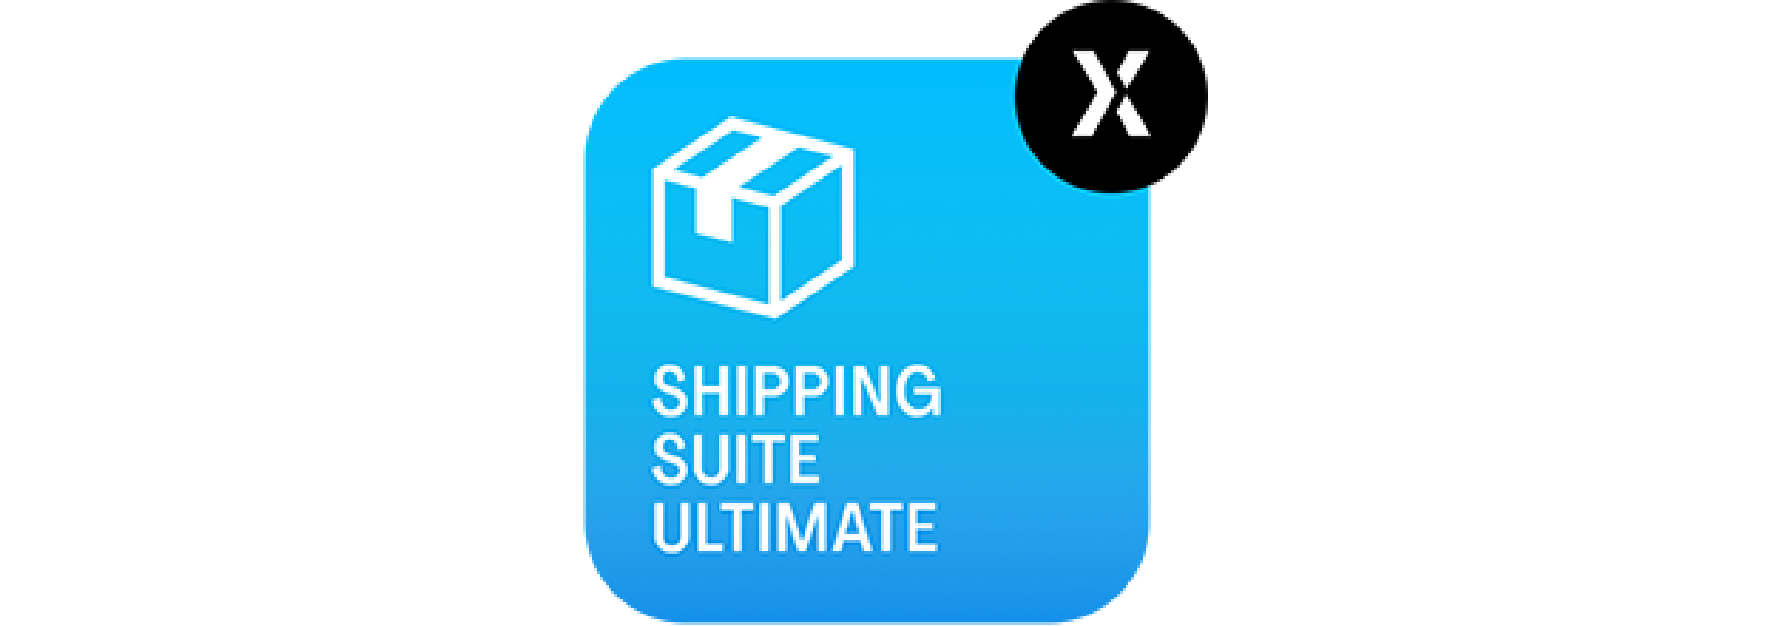 Magento 2 Shipping Suite Ultimate by Mageworx for Custom Shipping Rates